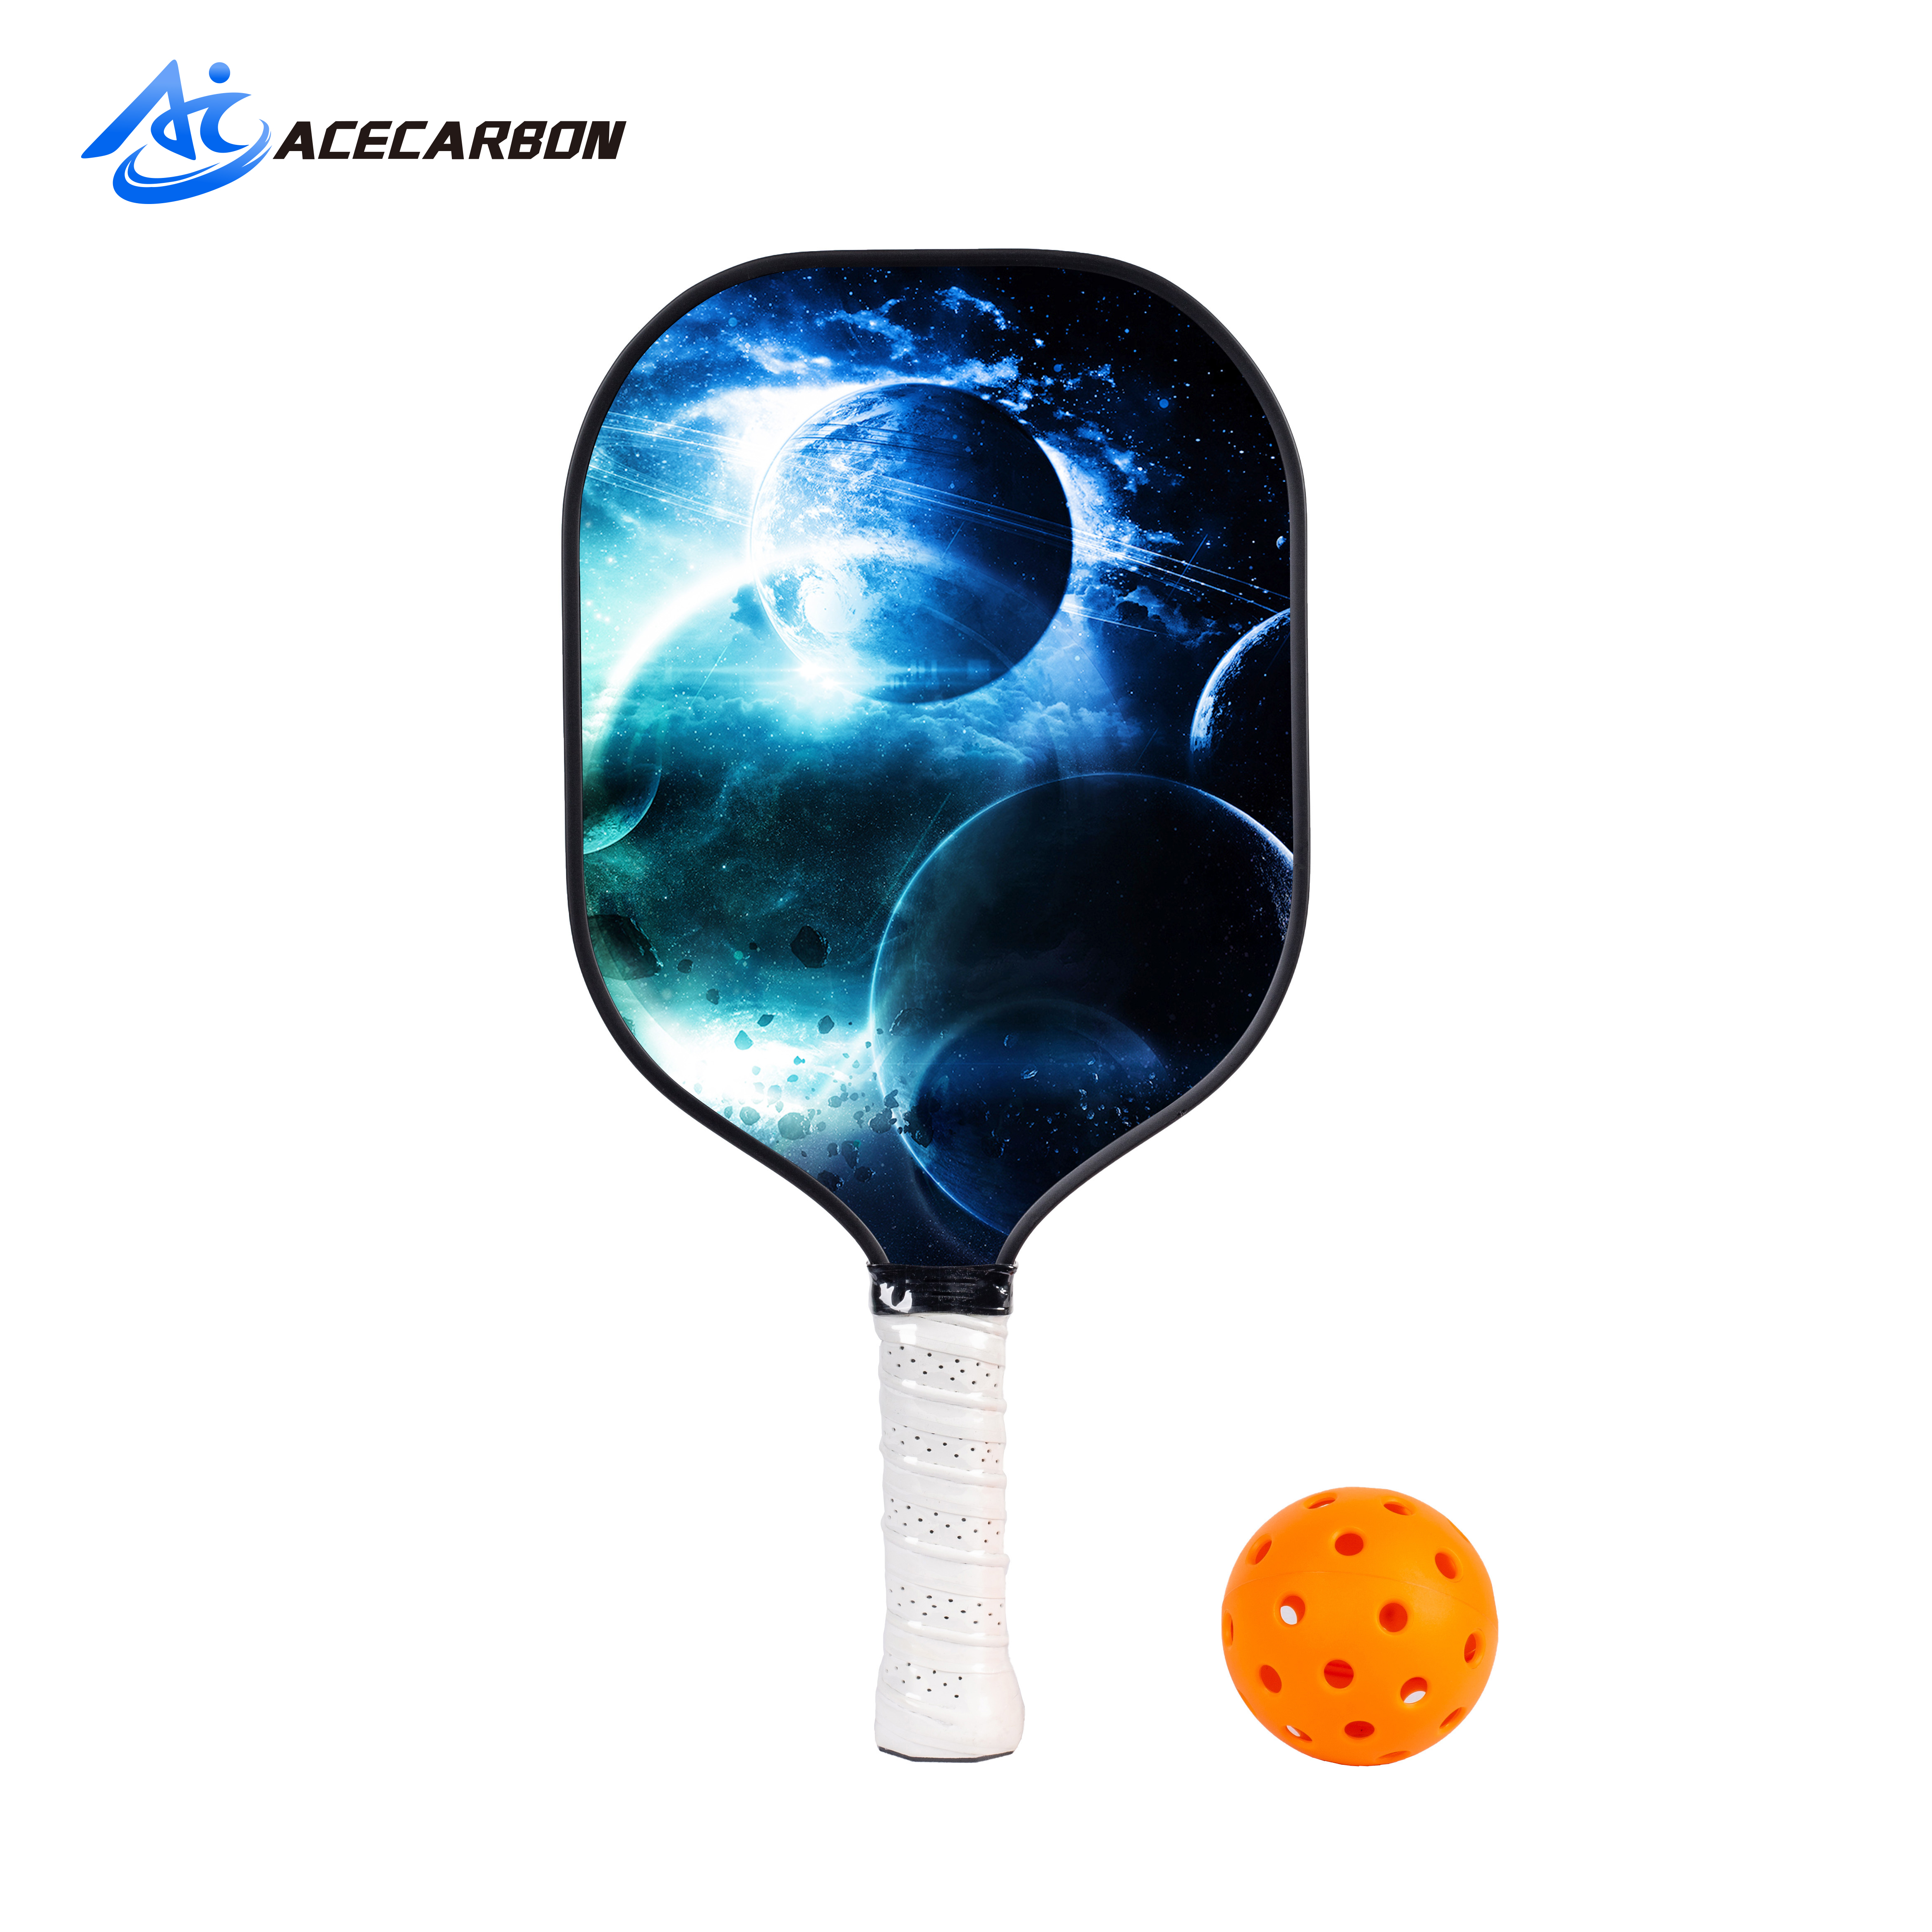 ACECARBON's Tennis Paddles: Precision Craftsmanship for Unmatched Performance